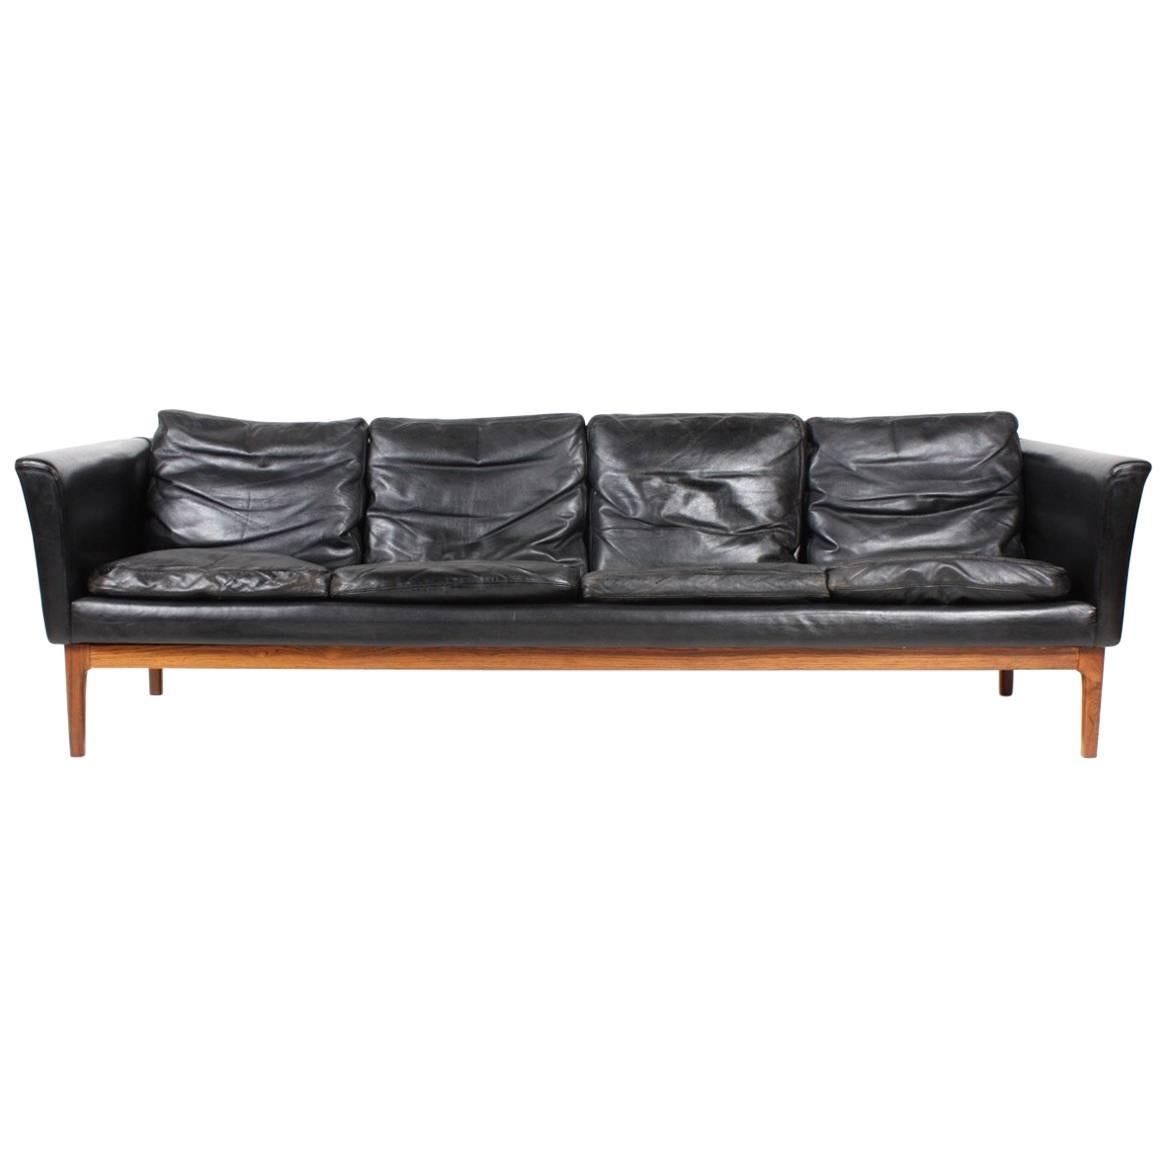 Stunning Four-Seat Sofa in Leather